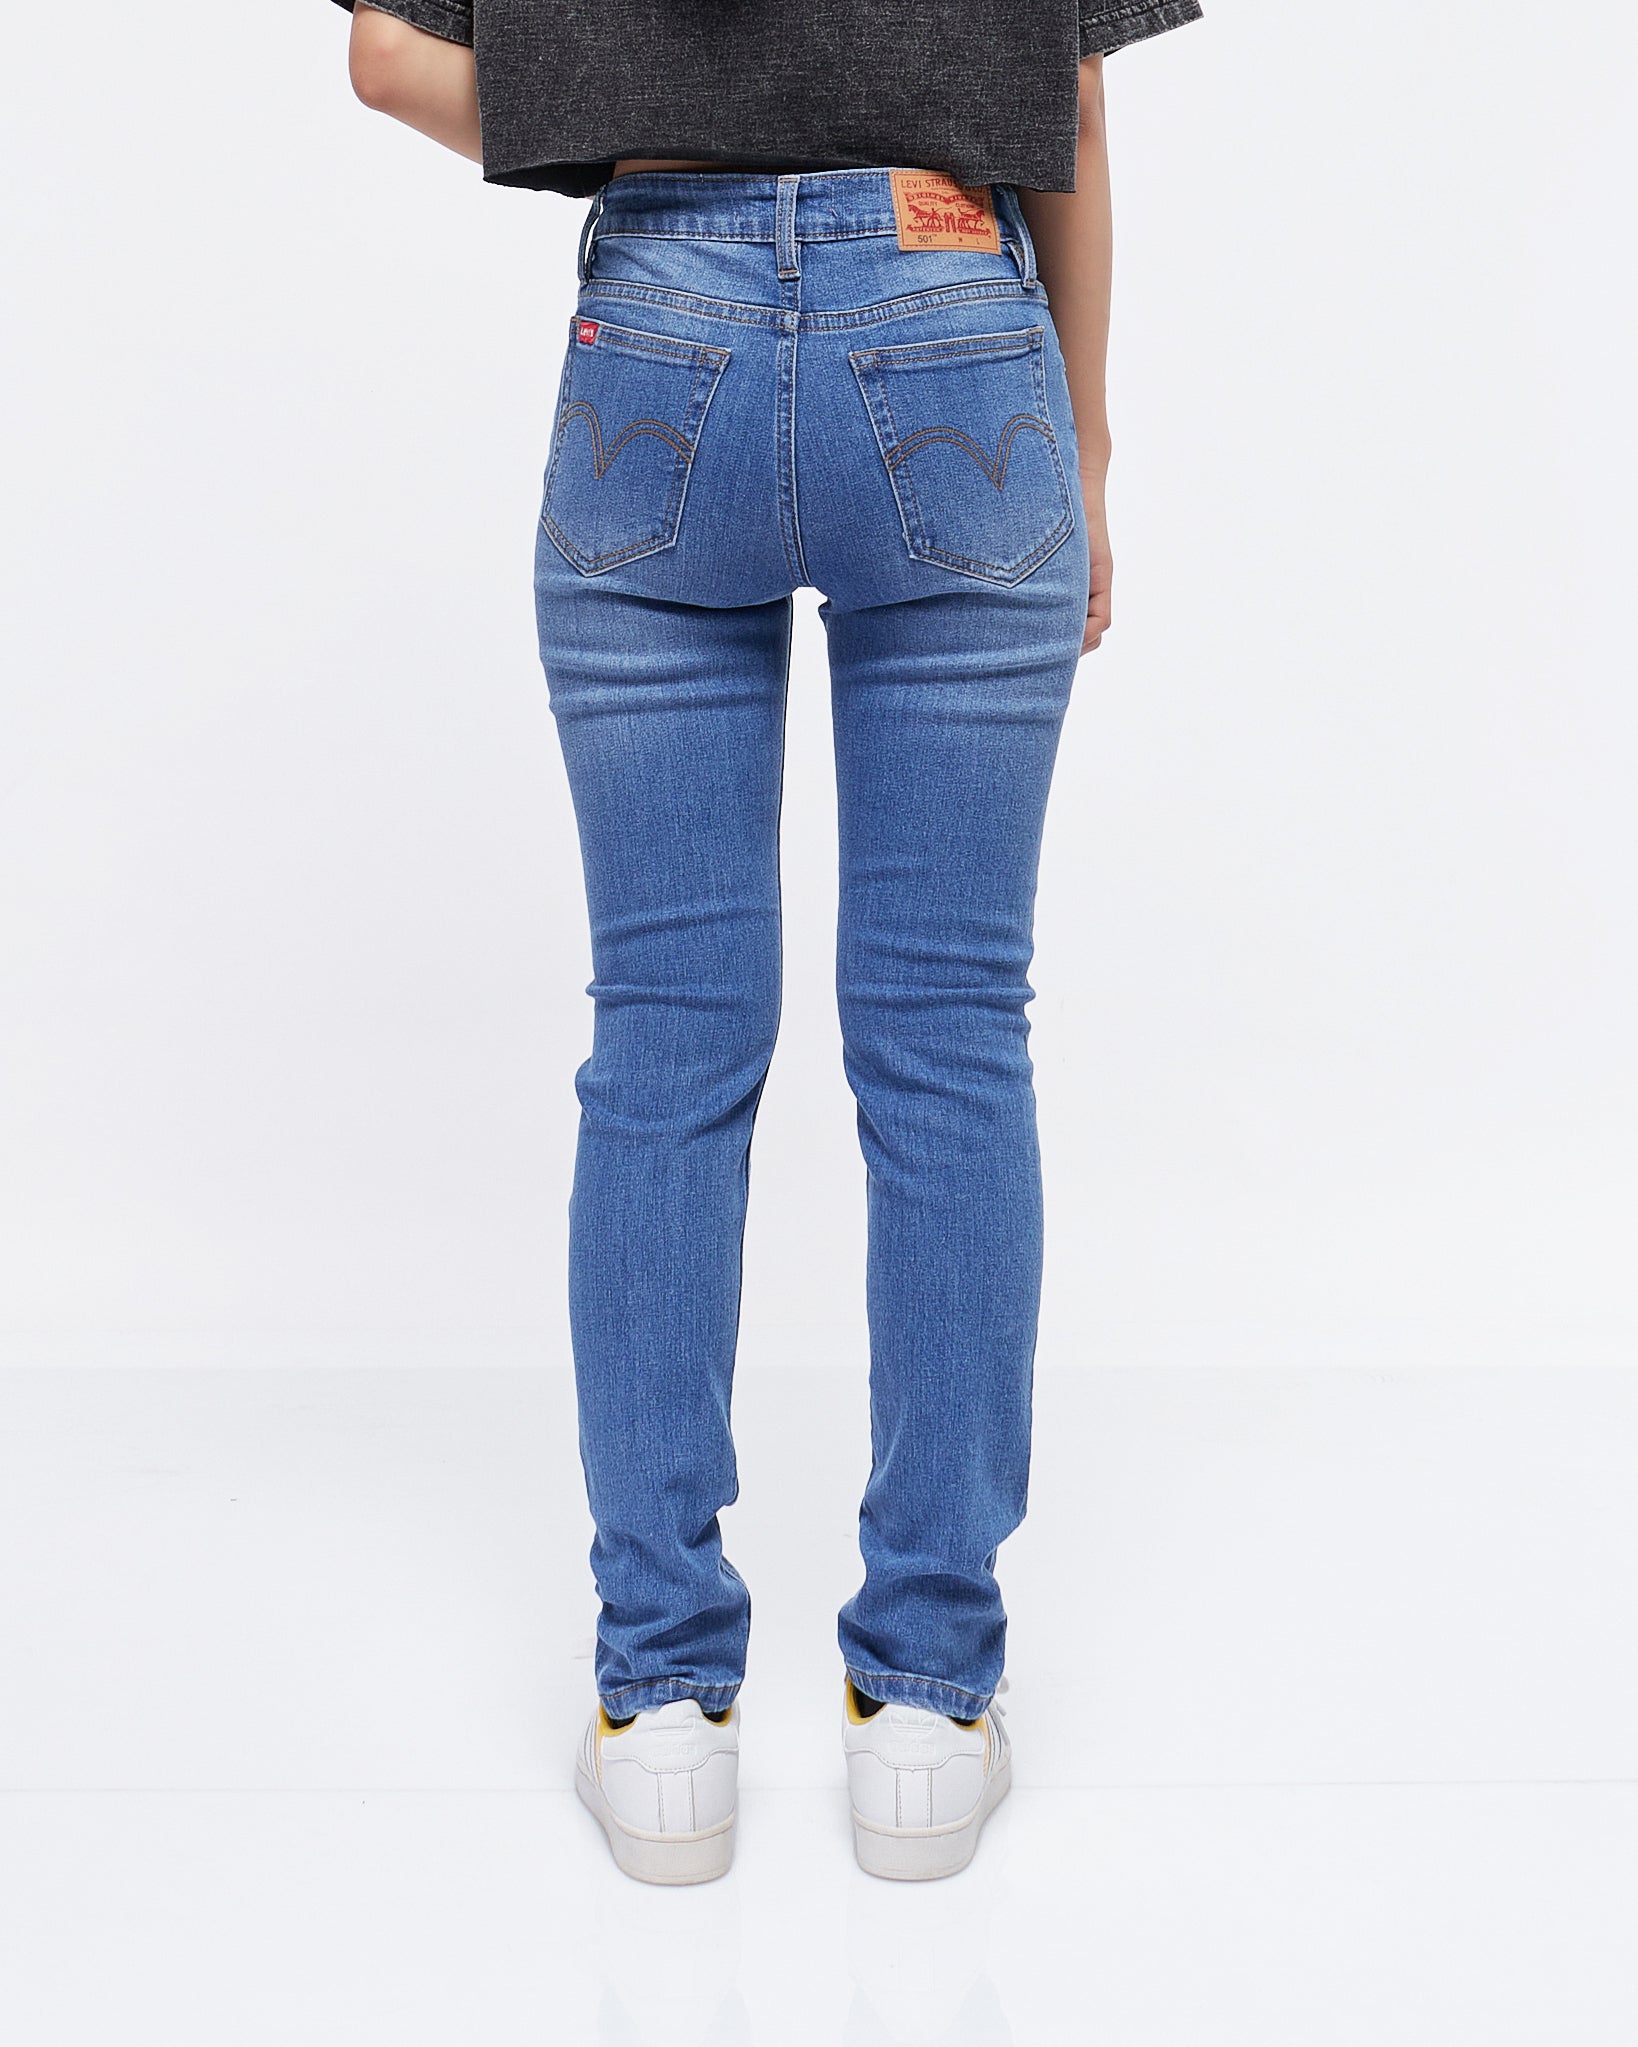 MOI OUTFIT-Straight Leg Lady Jeans 21.50